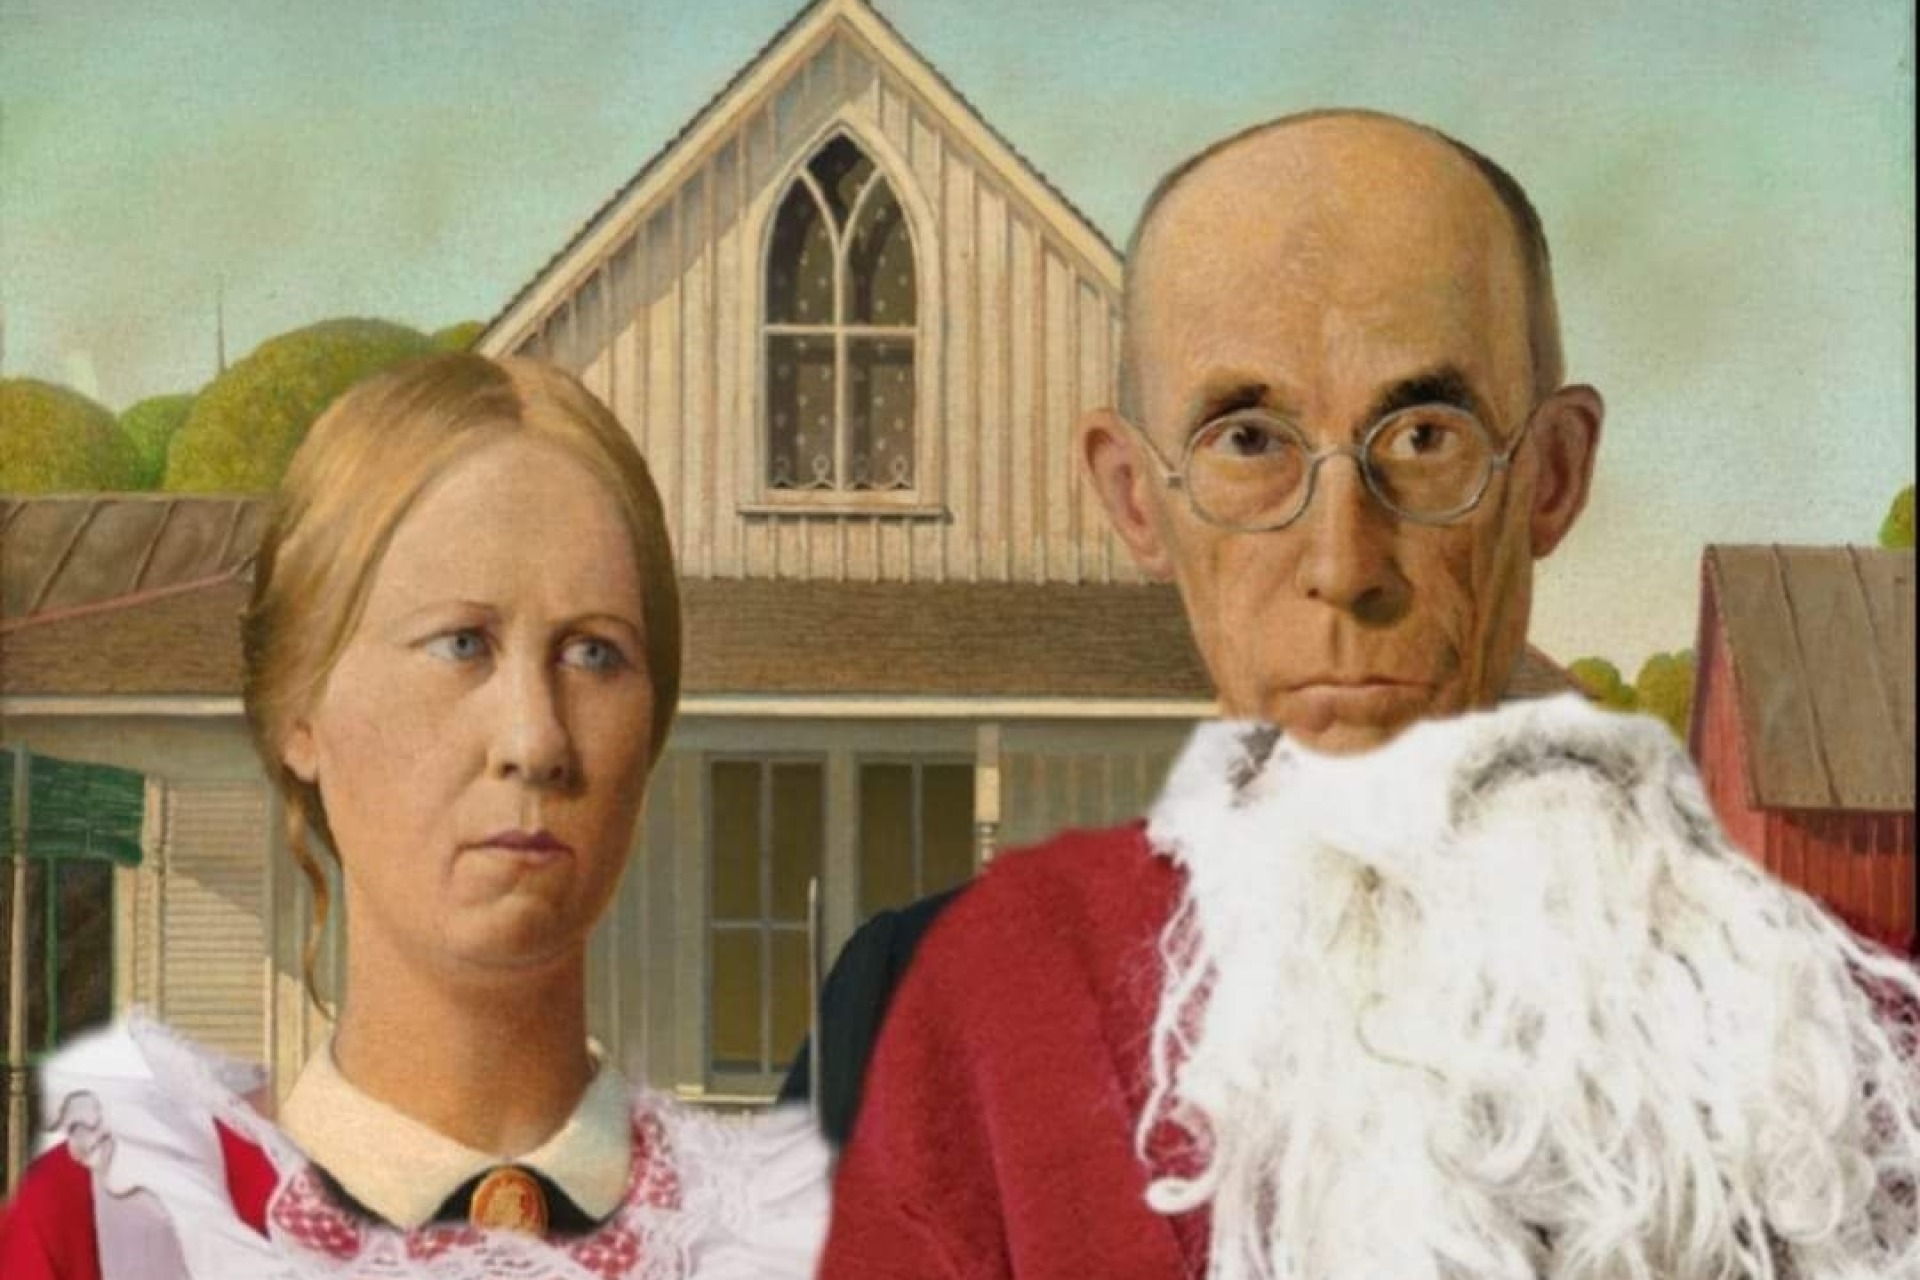 American Gothic Gingerbread "House" Party